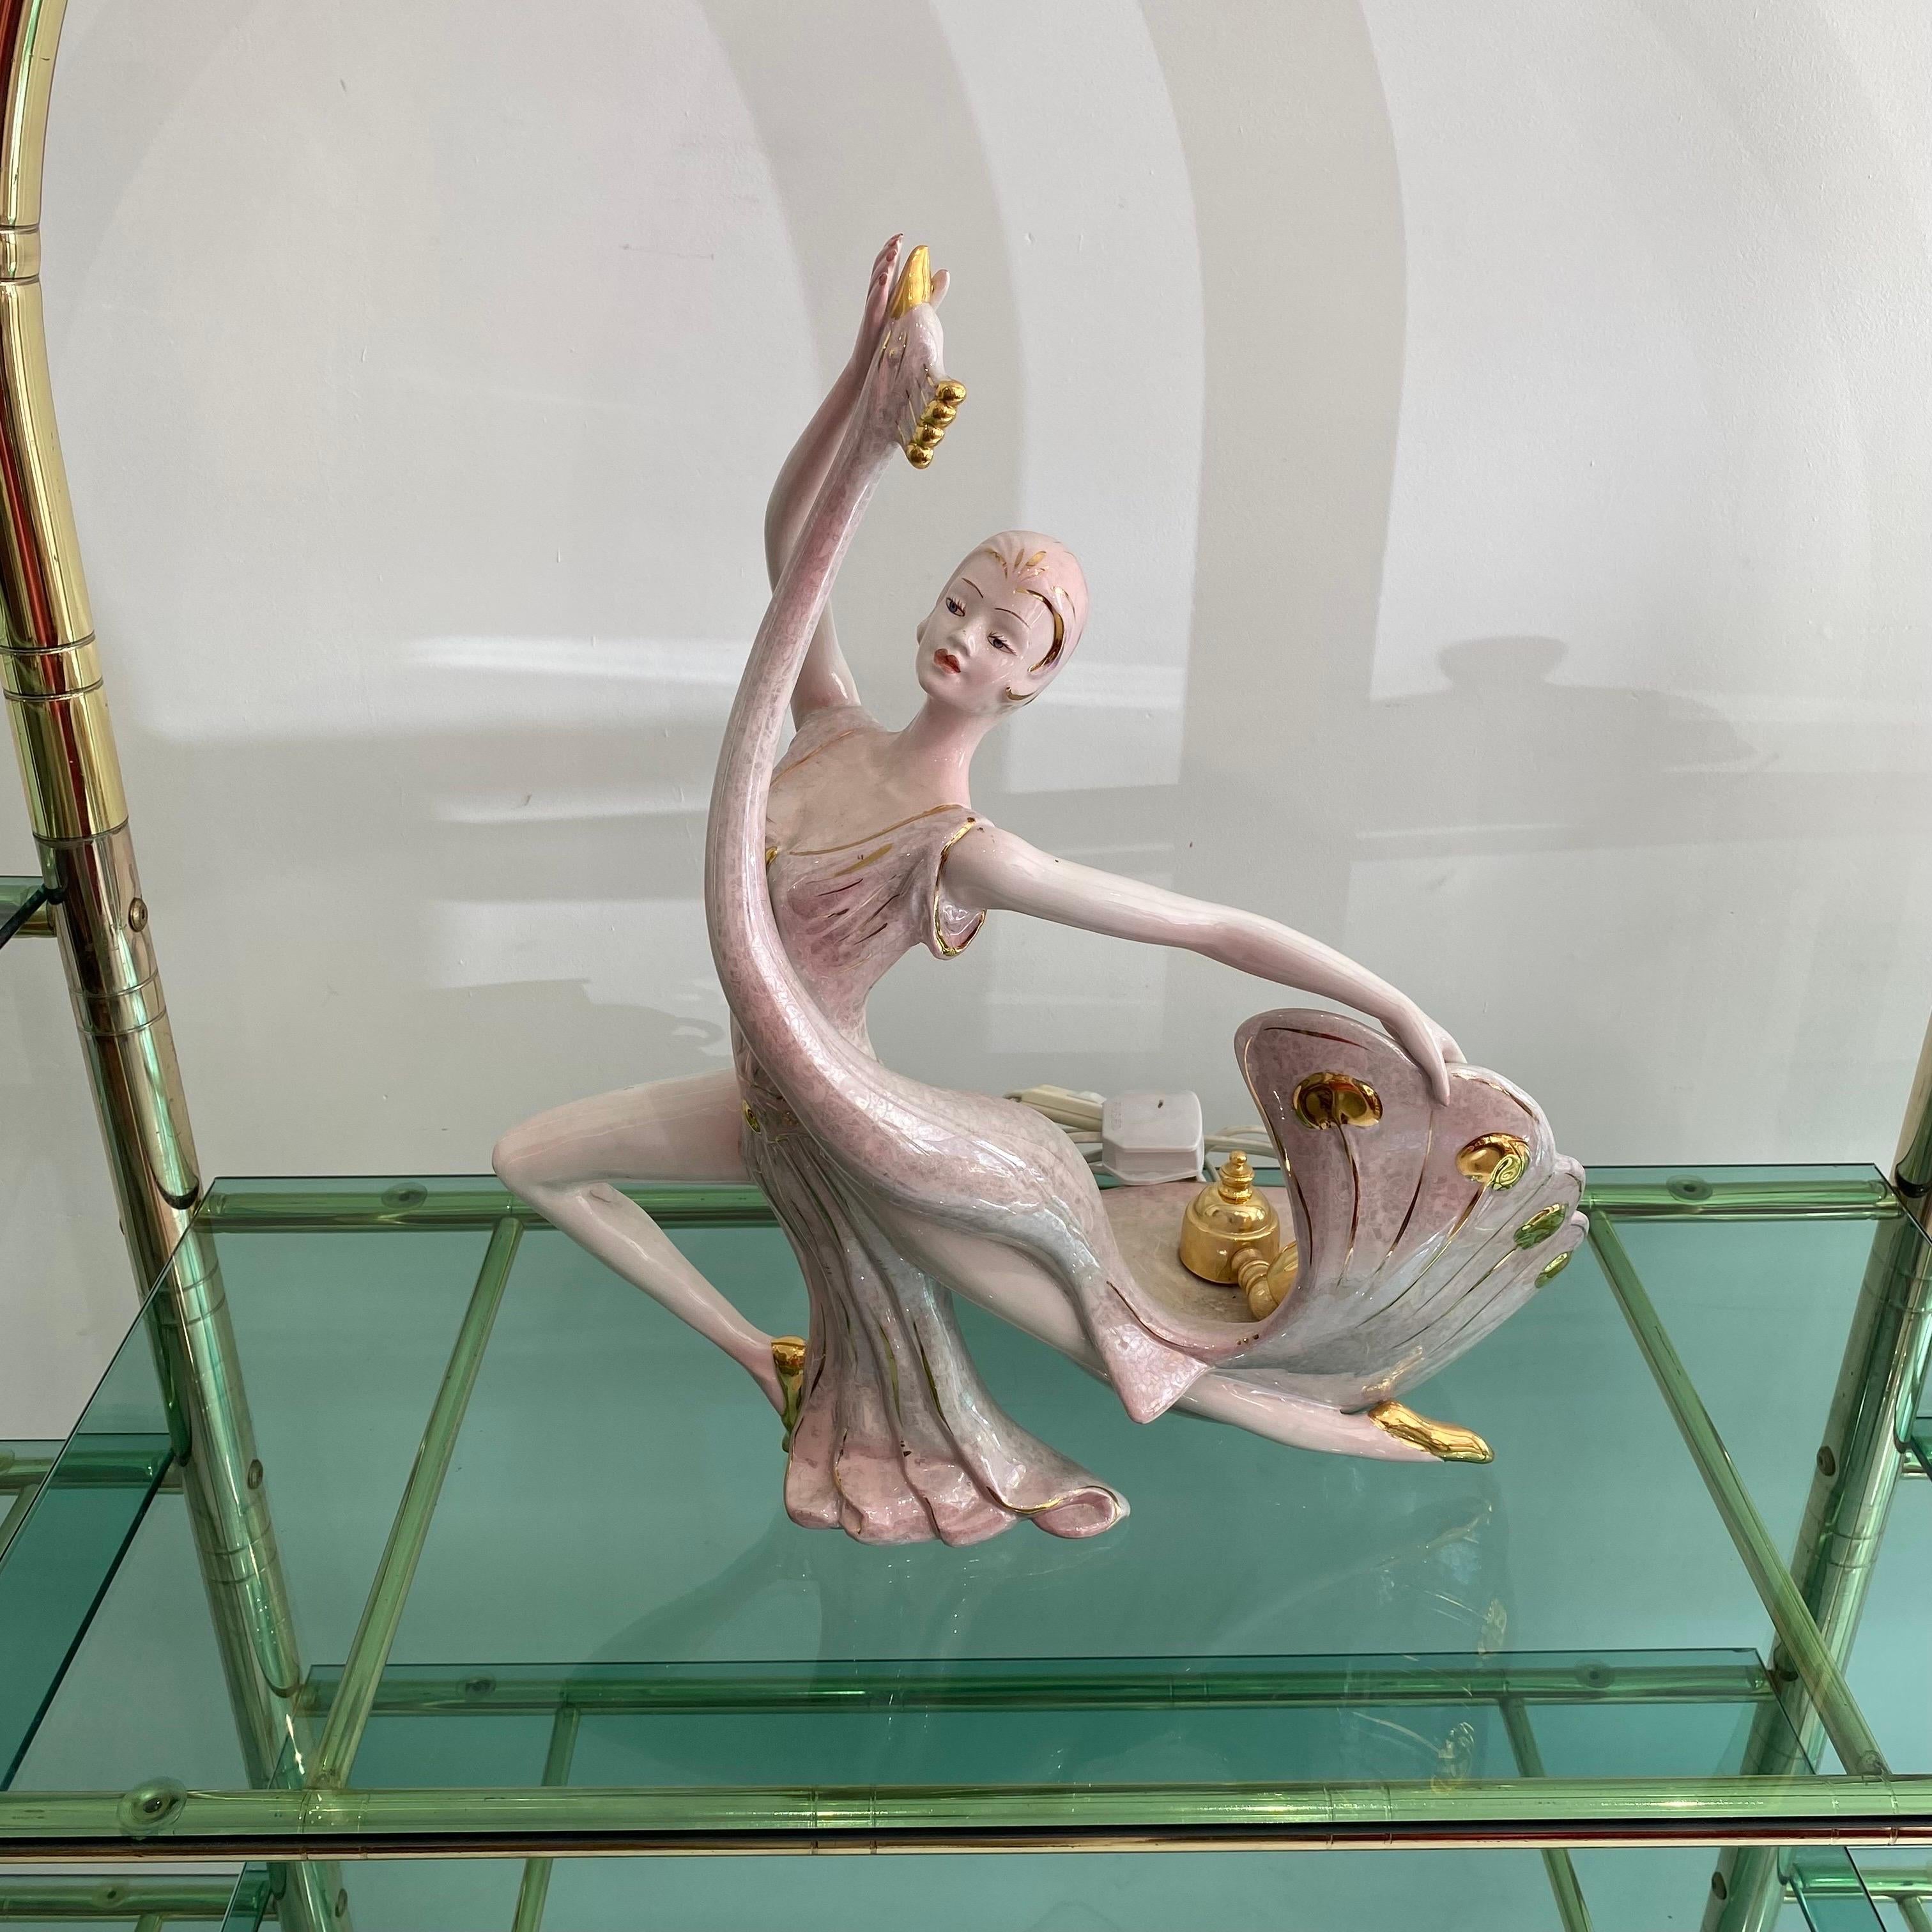 An elegant ceramic table lamp depicting a dancer with a swan dress like bird that transforms into a lamp. This piece is reminiscent of Erte fashion illustrations of the Art Deco period.
Pink and cream glazed shades with 24k gold finishing. Very good